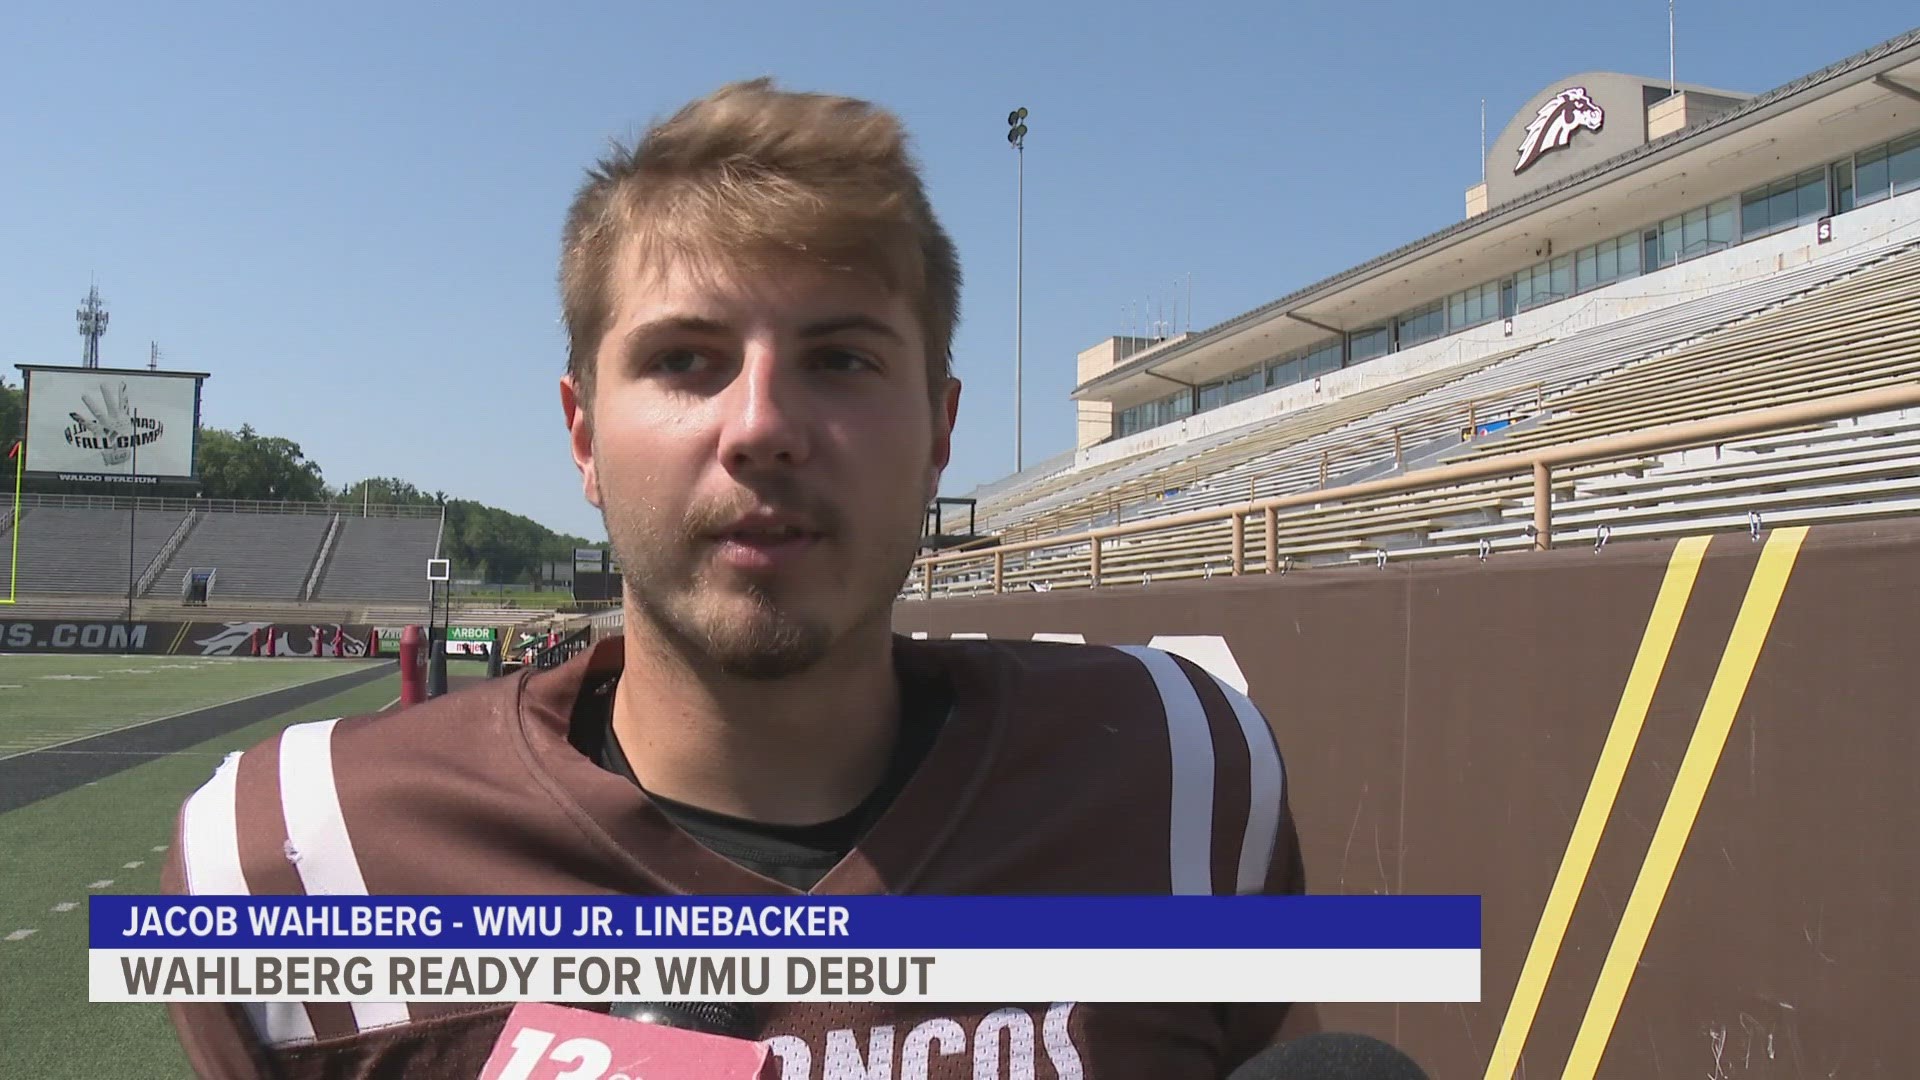 Jacob Wahlberg will be taking the field at Waldo Stadium for the first time, years after he first dreamt of coming there.